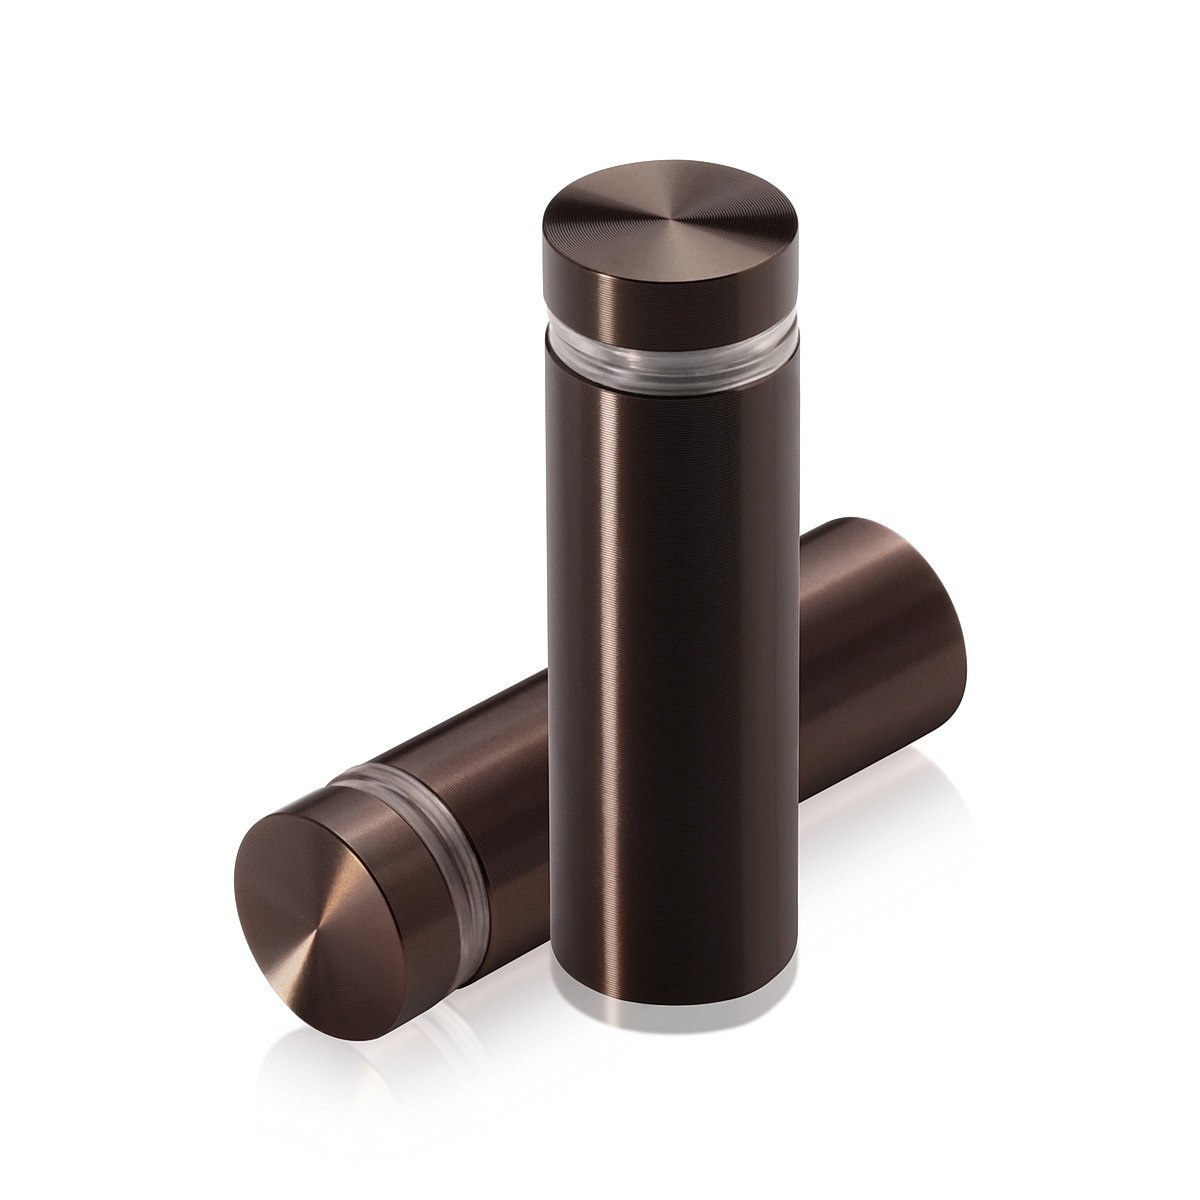 5/8'' Diameter X 1-3/4'' Barrel Length, Aluminum Flat Head Standoffs, Bronze Anodized Finish Easy Fasten Standoff (For Inside / Outside use) Tamper Proof Standoff [Required Material Hole Size: 7/16'']